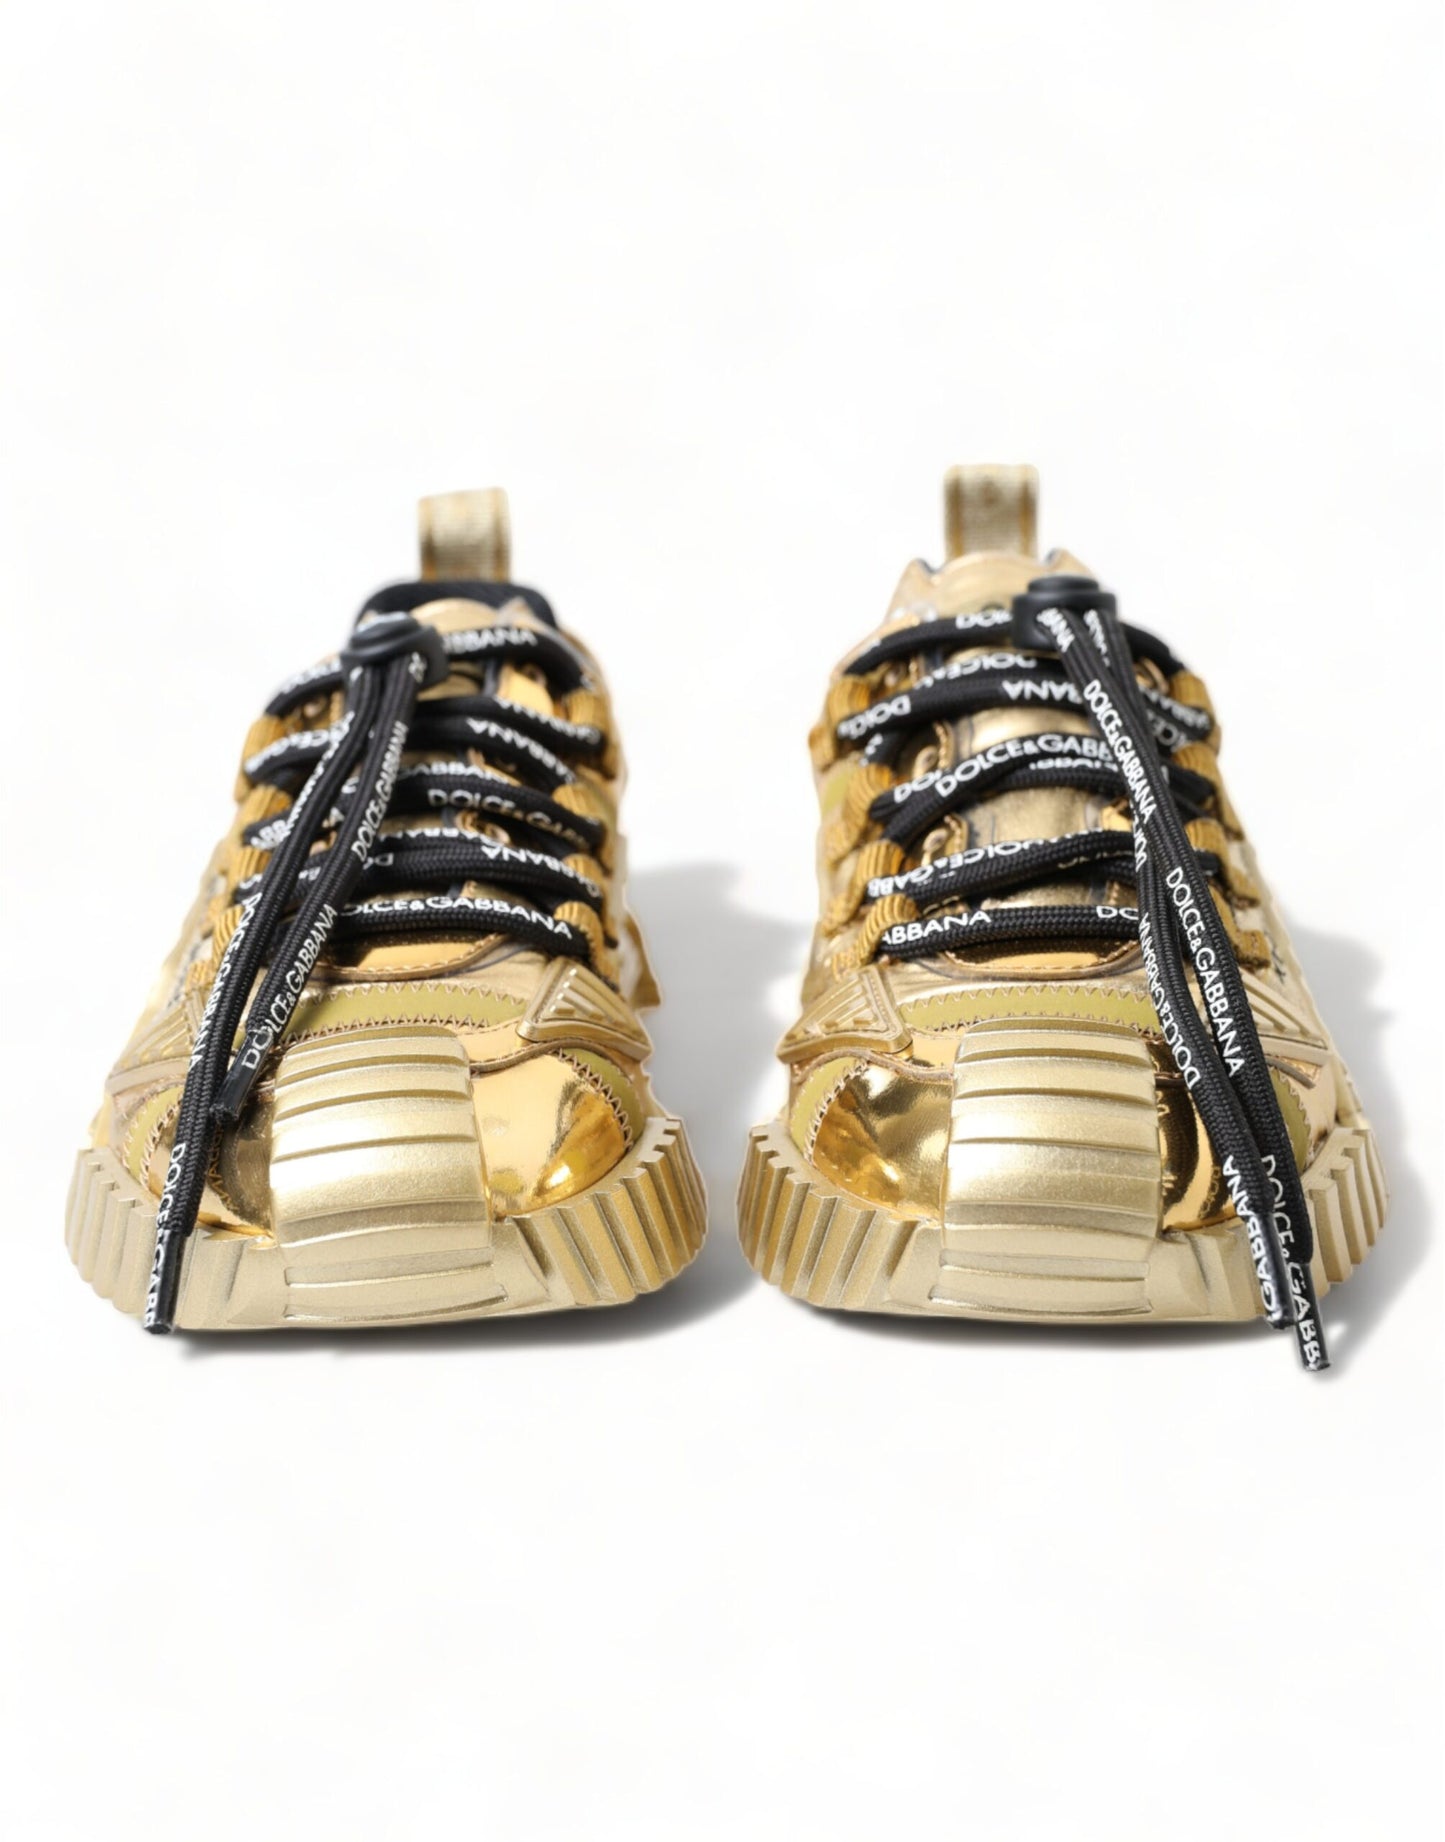 Gleaming Gold-Toned Luxury Sneakers